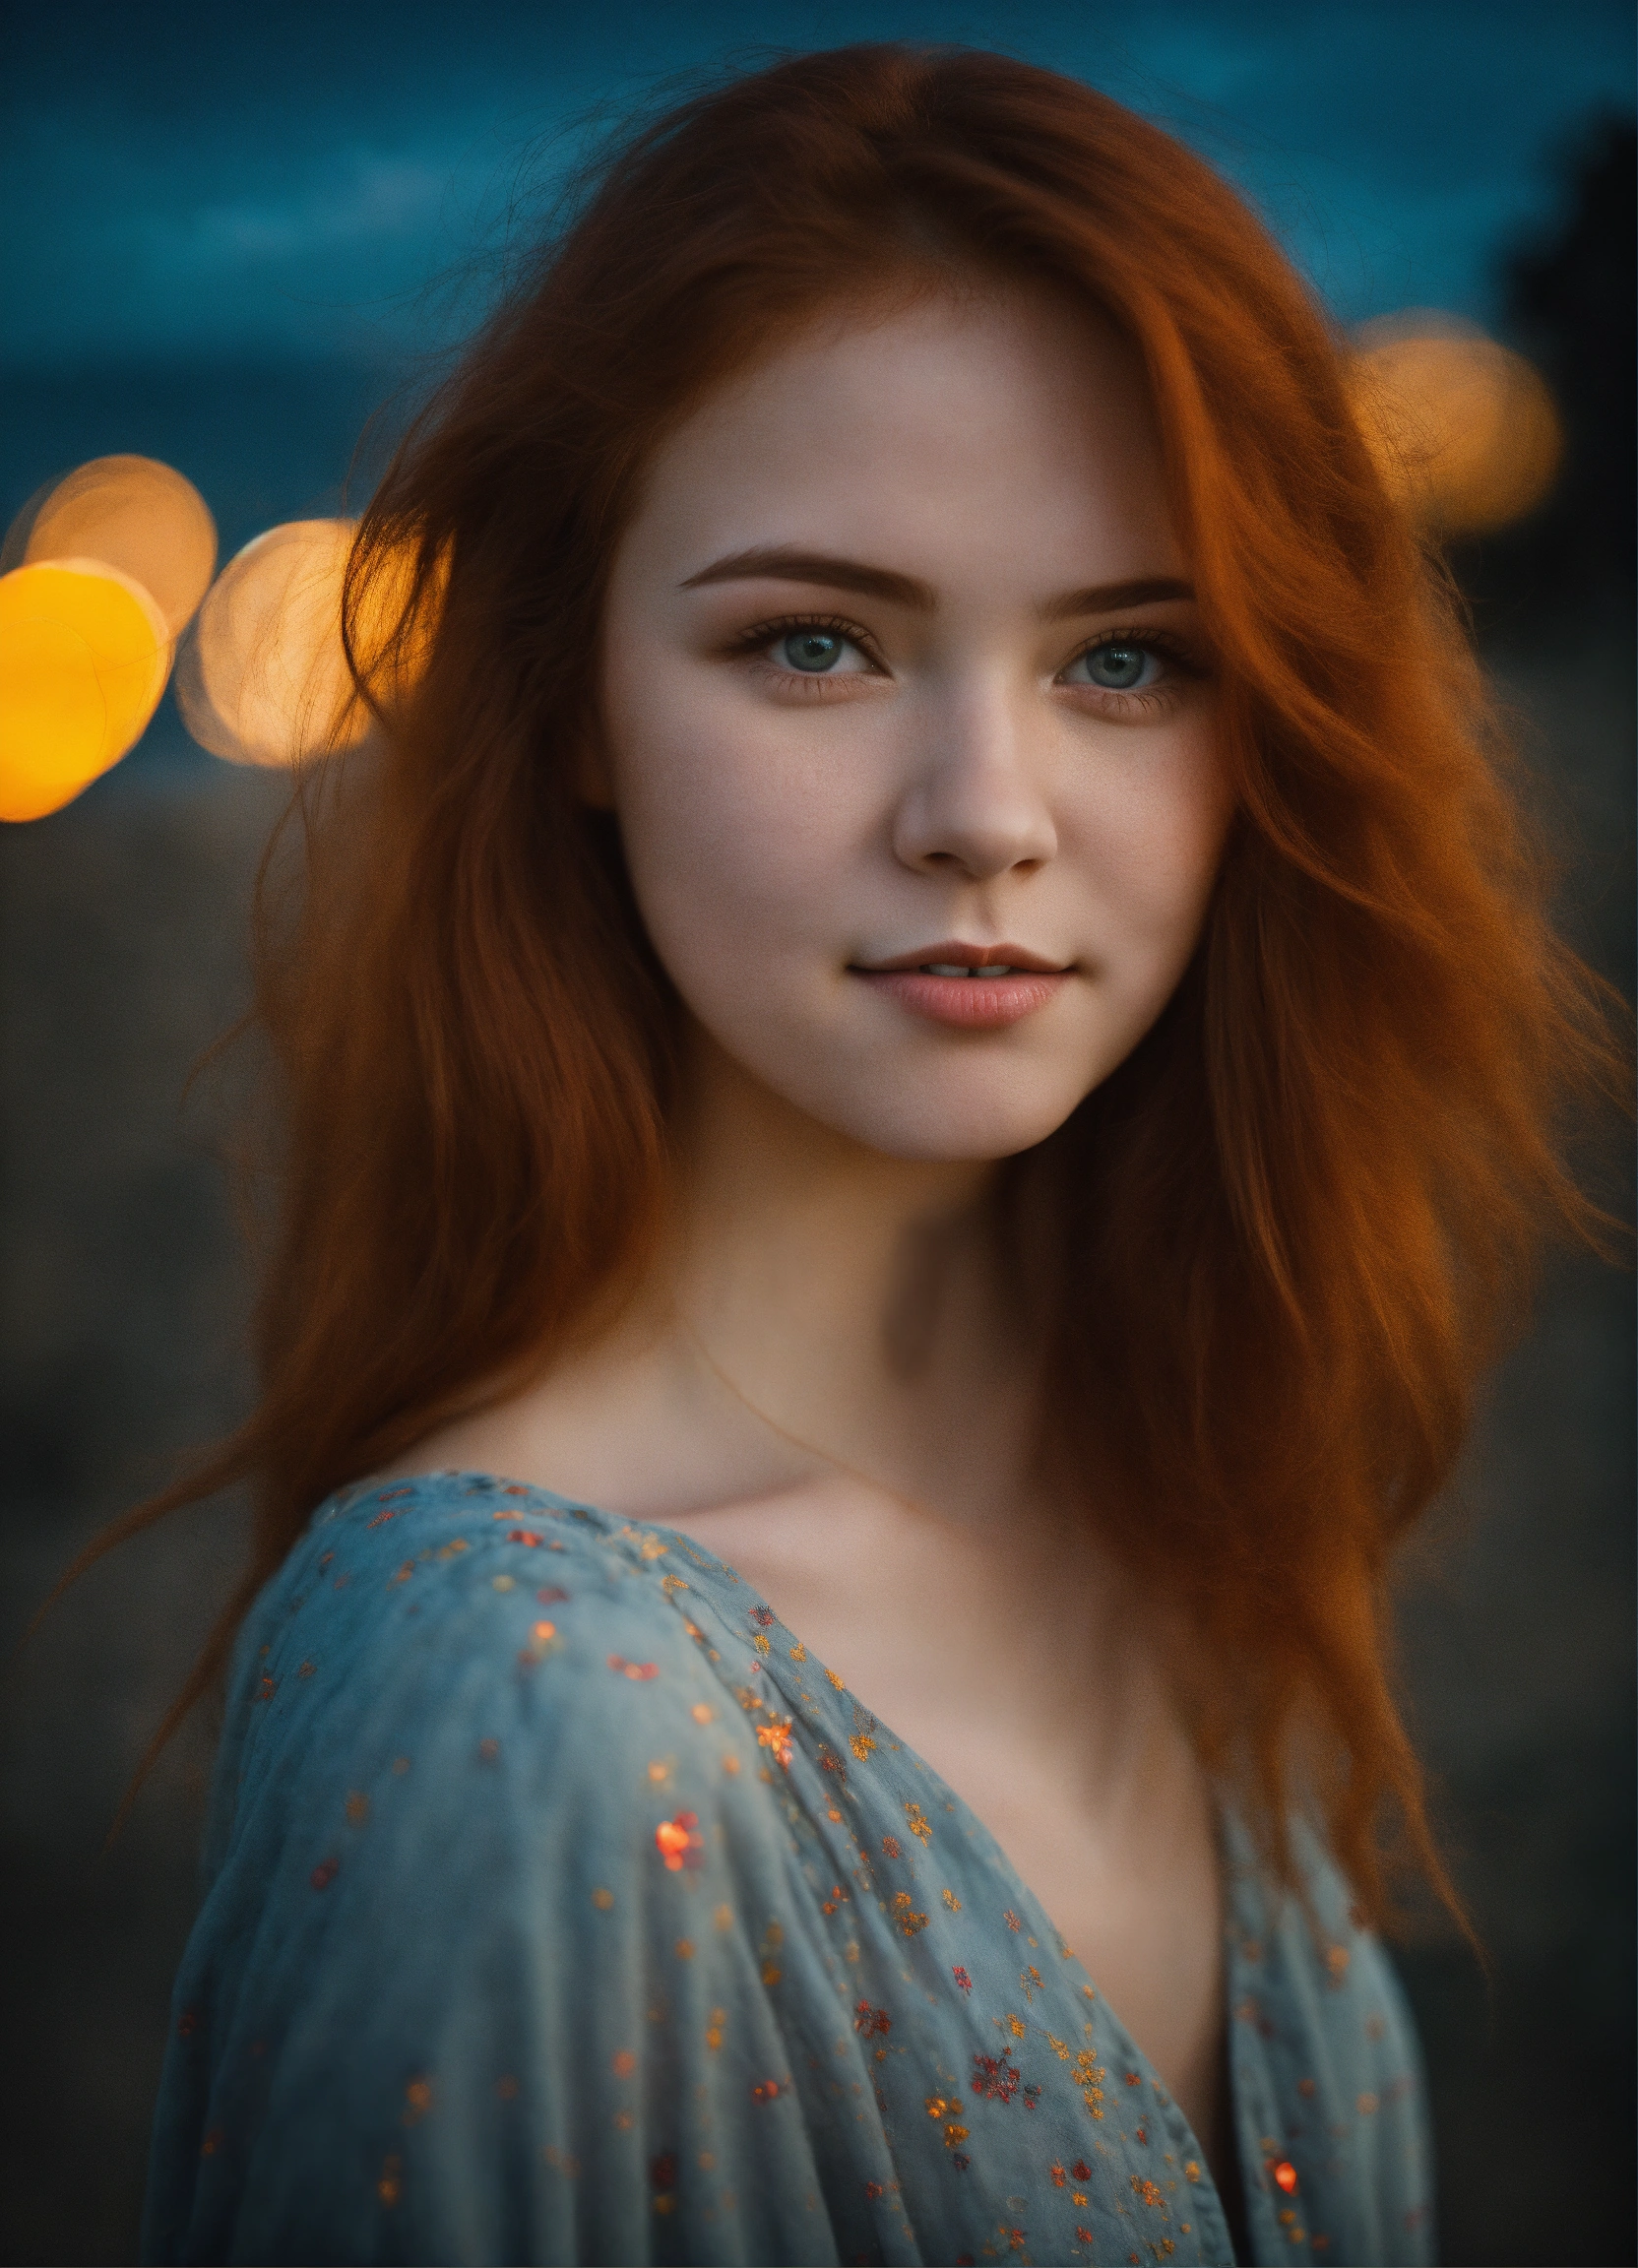 Lexica A Real Photo Of A 21 Year Very Cute Redhead Girl Looking